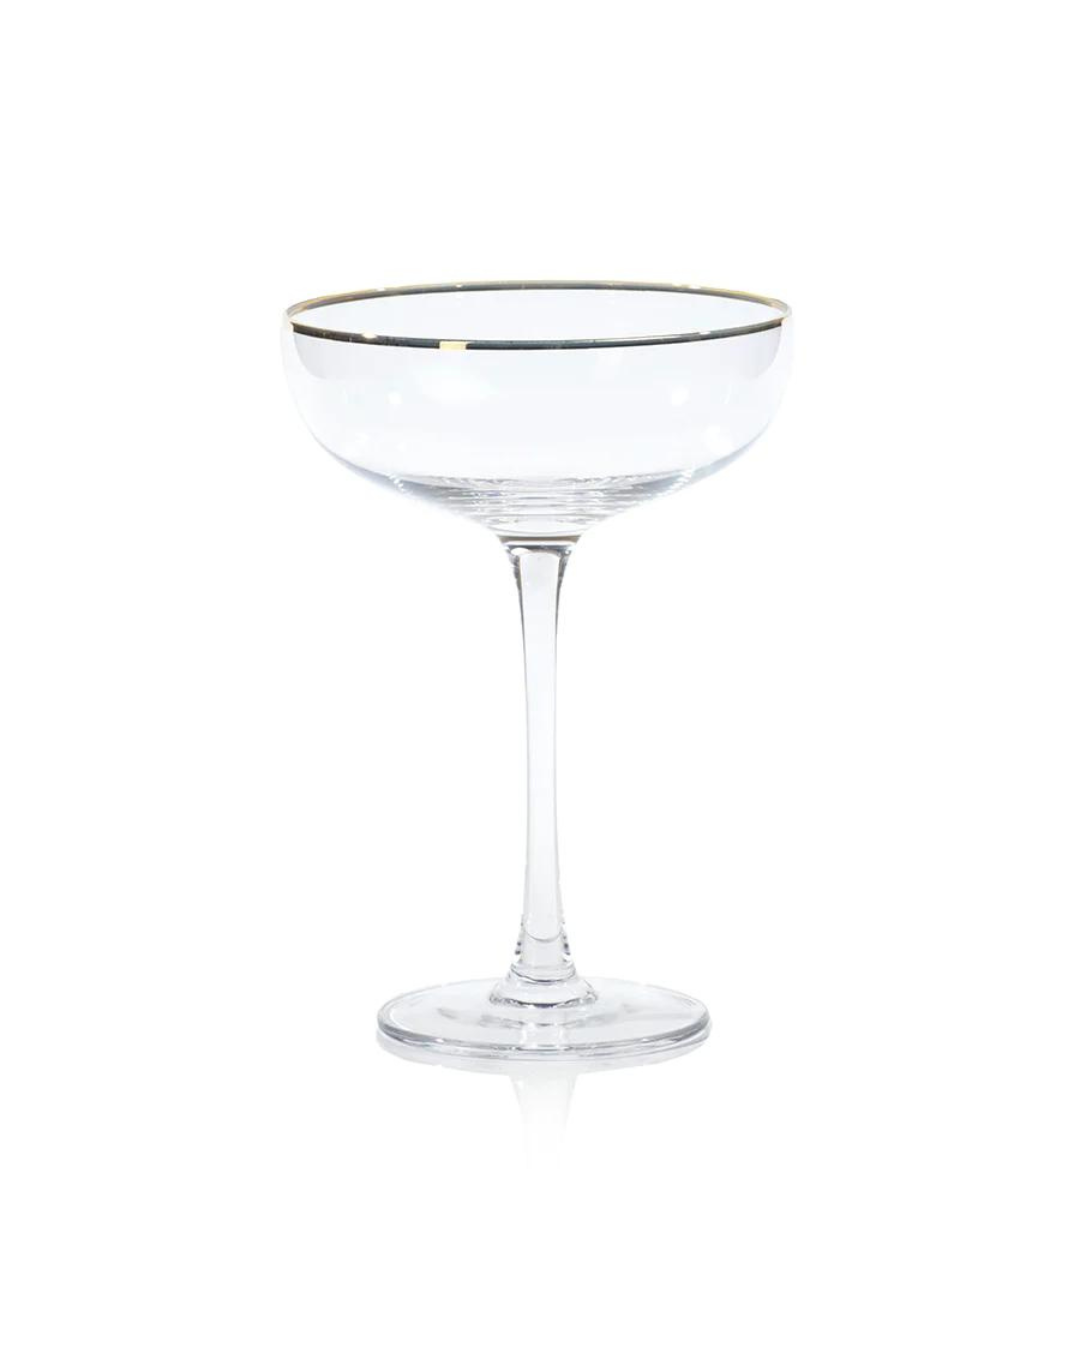 Martini / Serving Bowl with Gold Rim